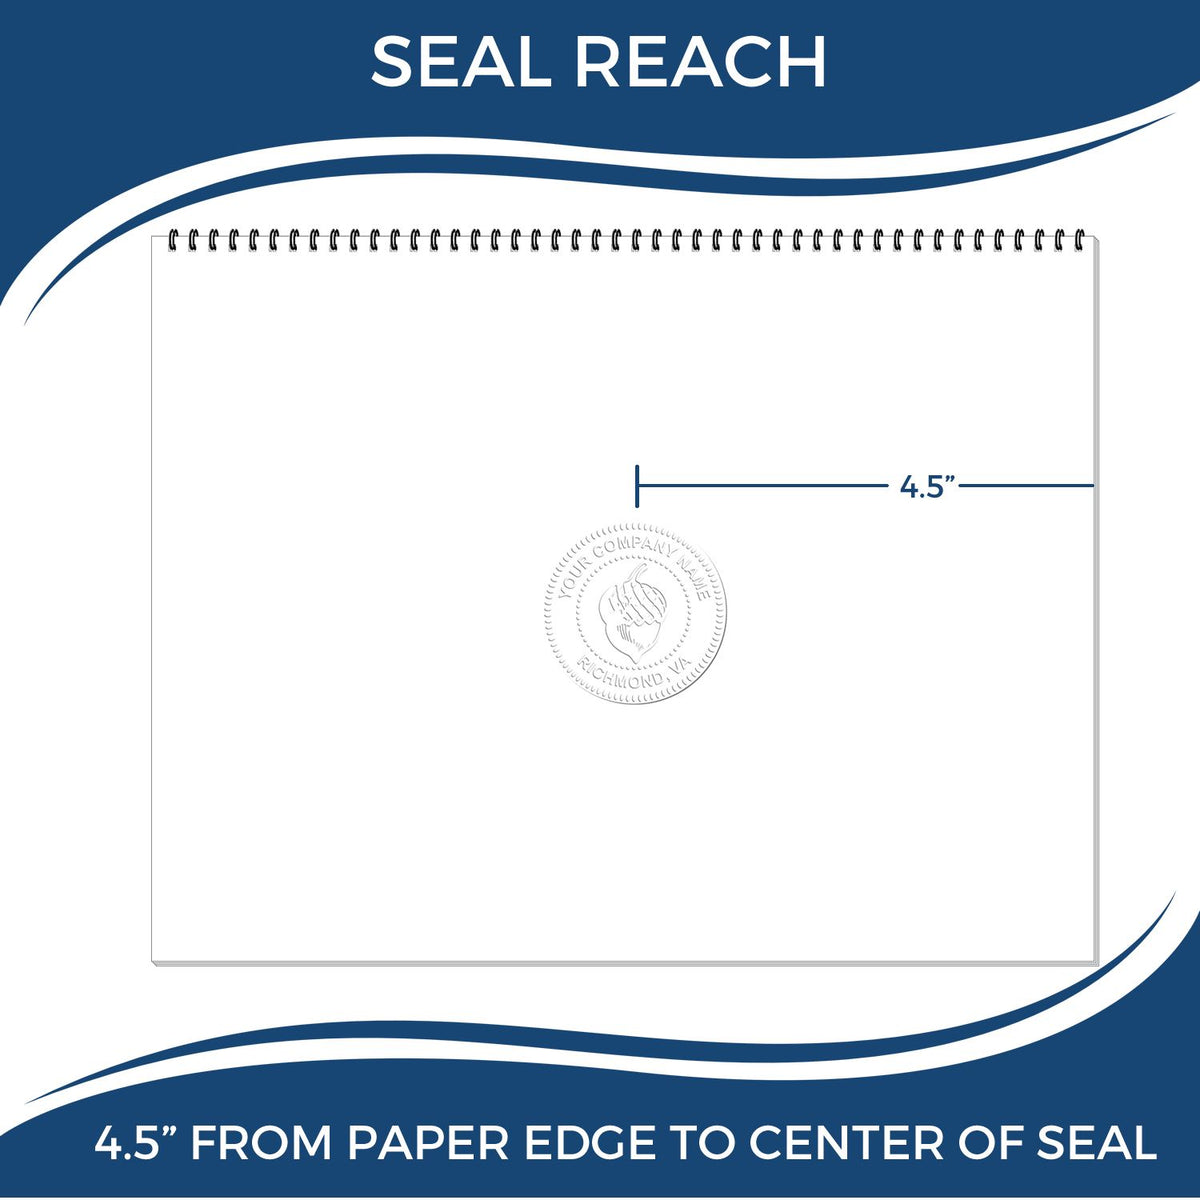 An infographic showing the seal reach which is represented by a ruler and a miniature seal image of the Extended Long Reach Louisiana Surveyor Embosser